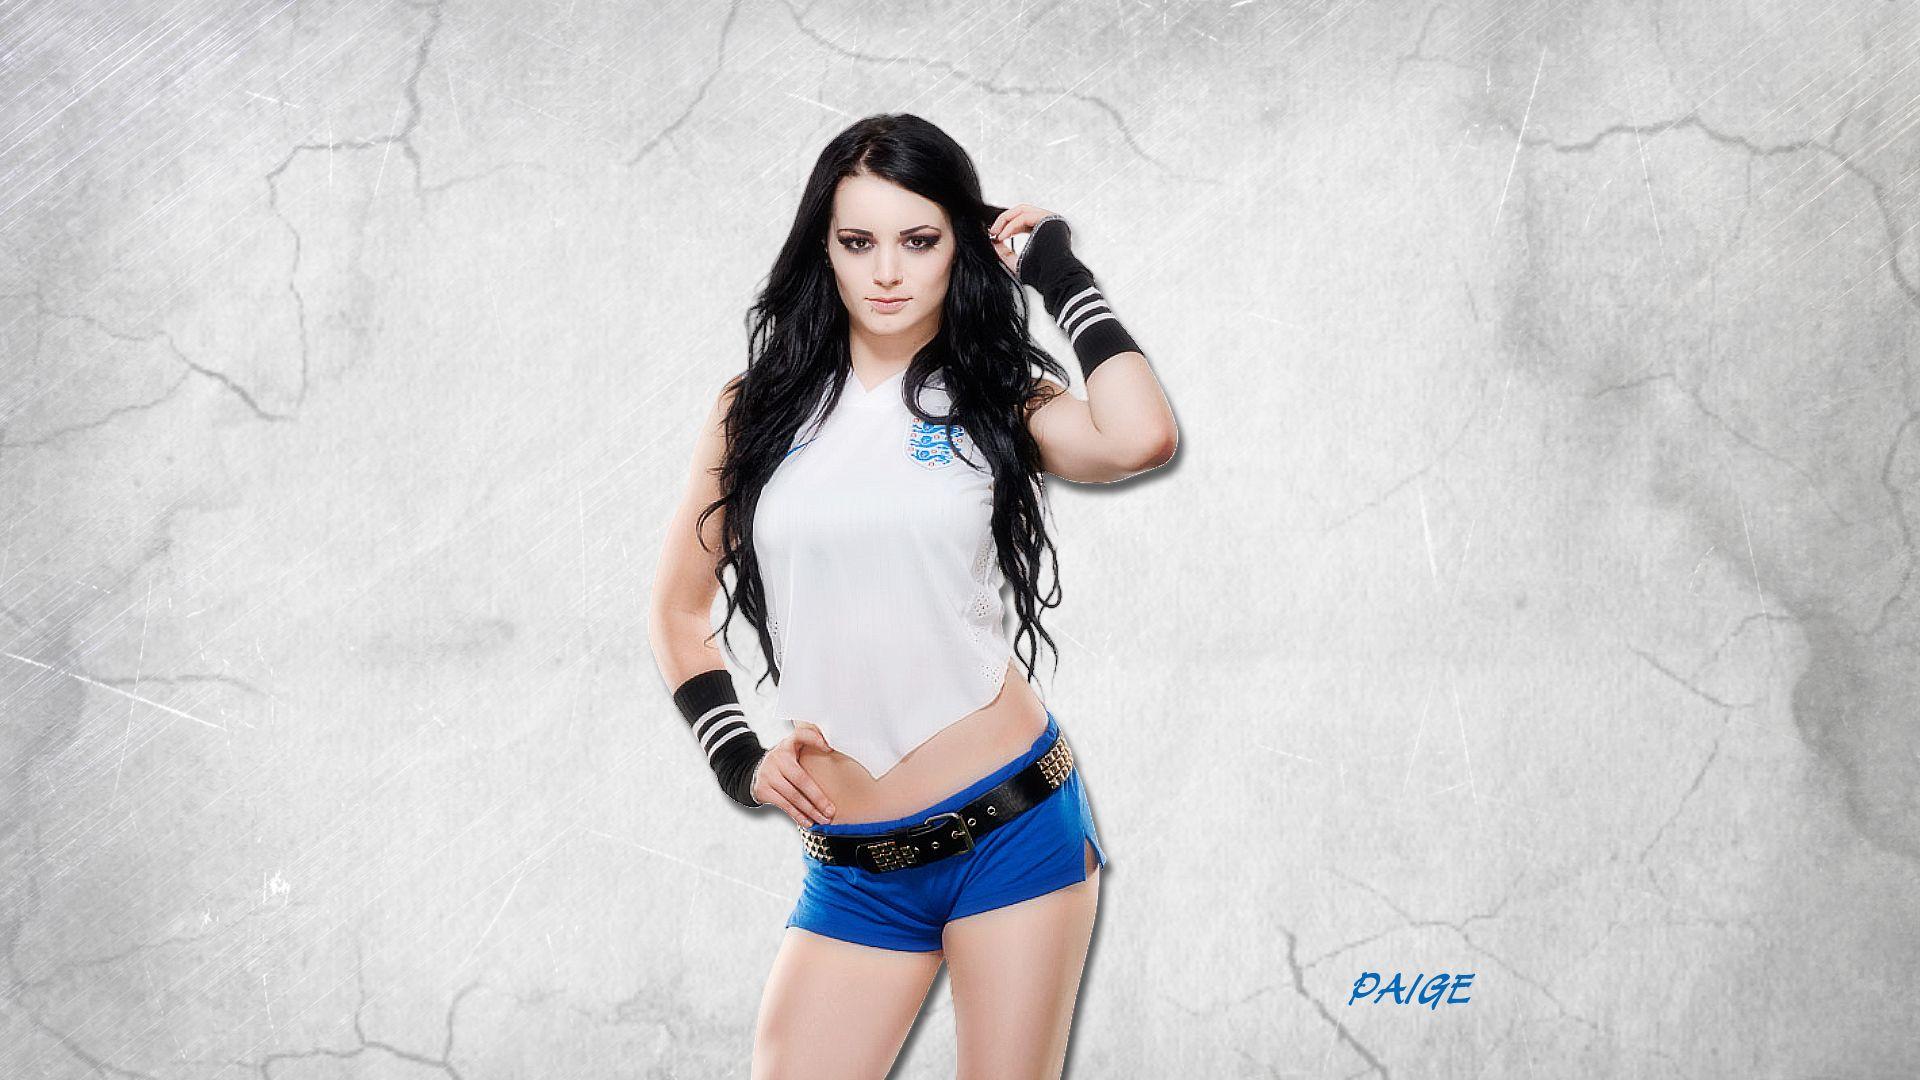 Paige WWE Wallpapers 